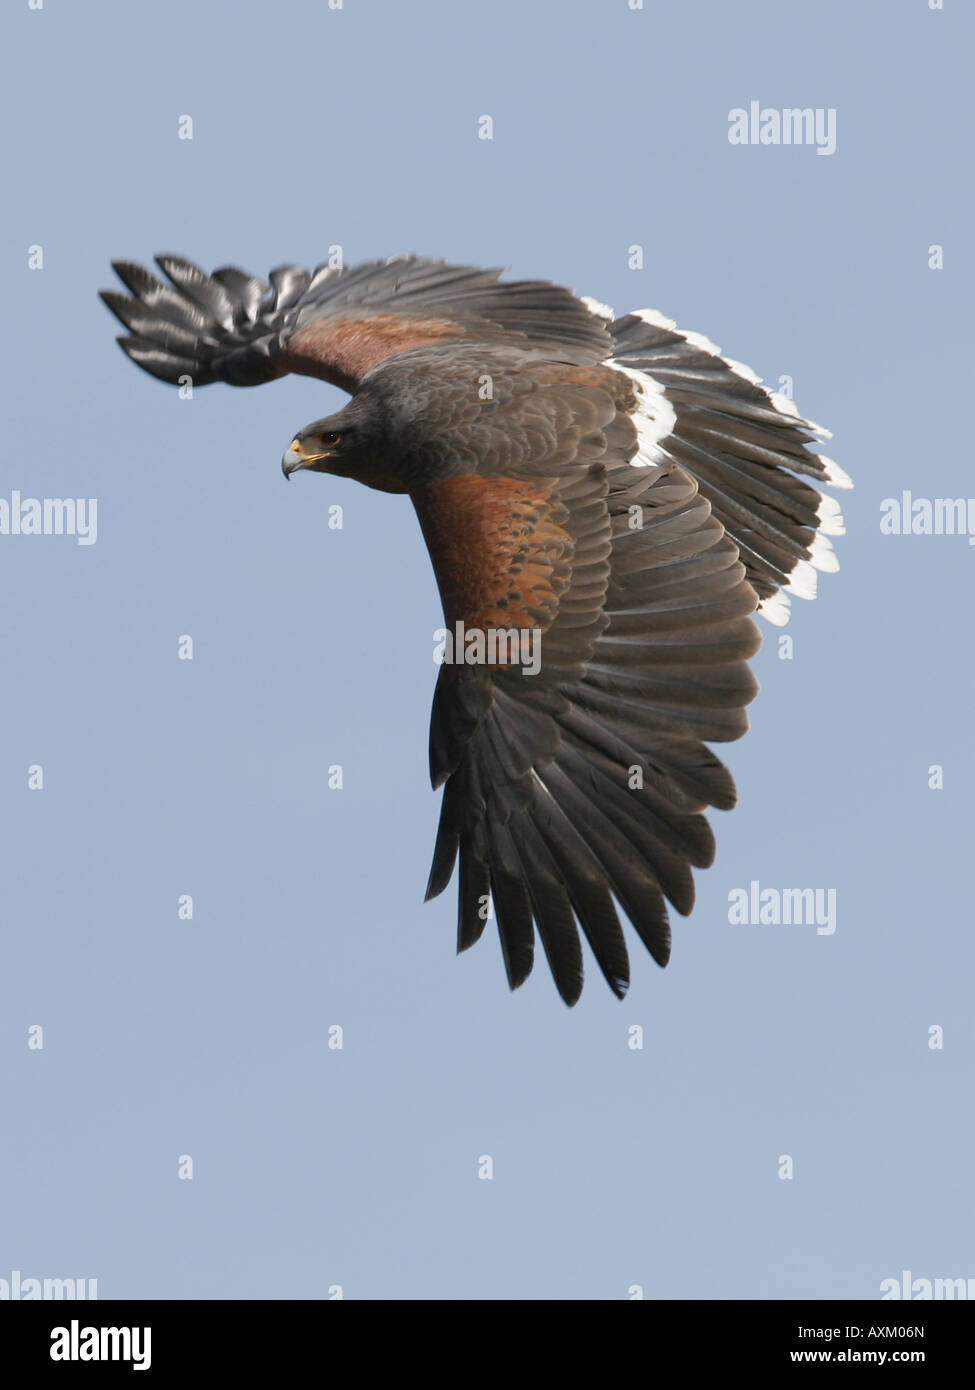 A Harris Hawk in flight with a blue sky background Stock Photo